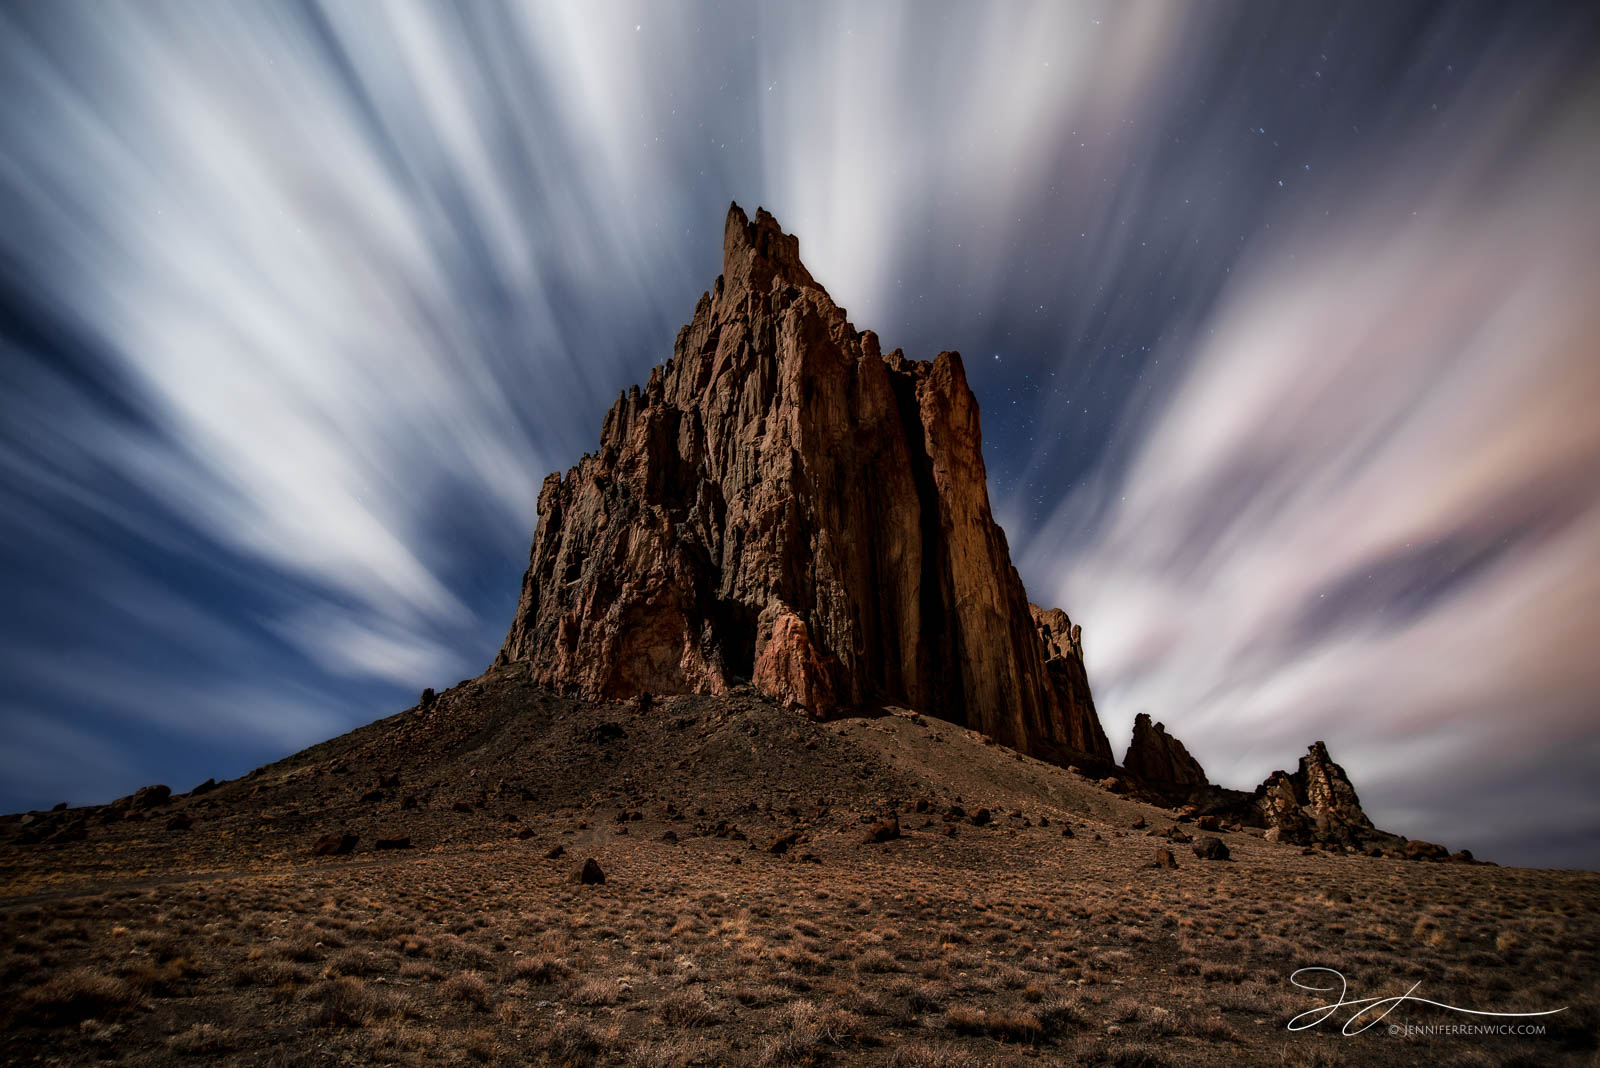 Shiprock catches light from the moon while a longer exposure creates magical cloud movement.